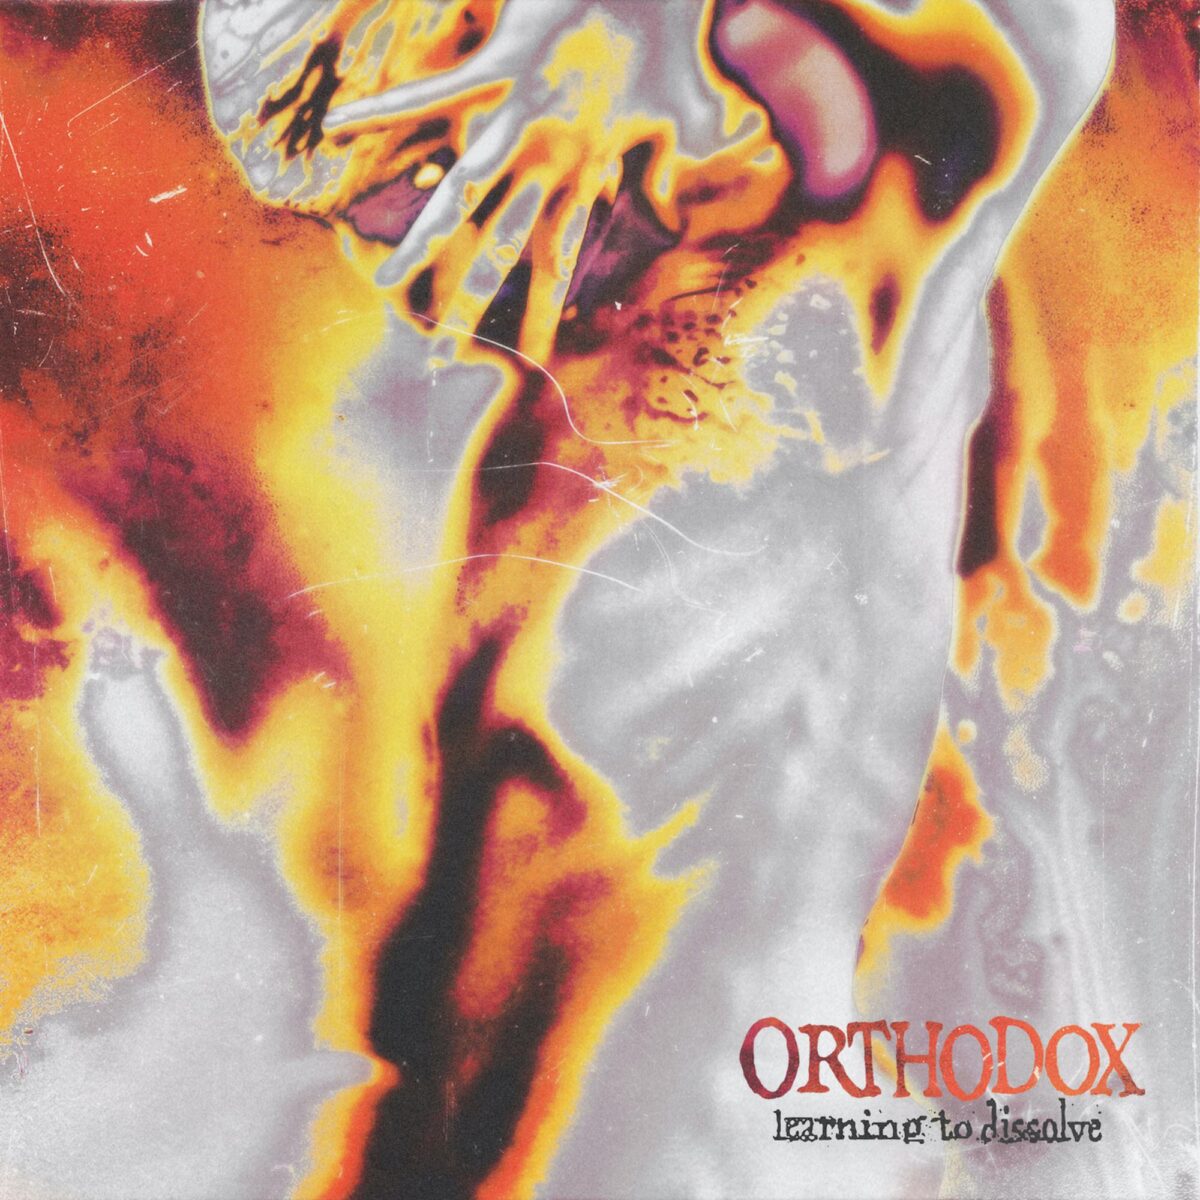 Orange and grey distorted image, album cover for Orthodox's album "Learning to Dissolve."